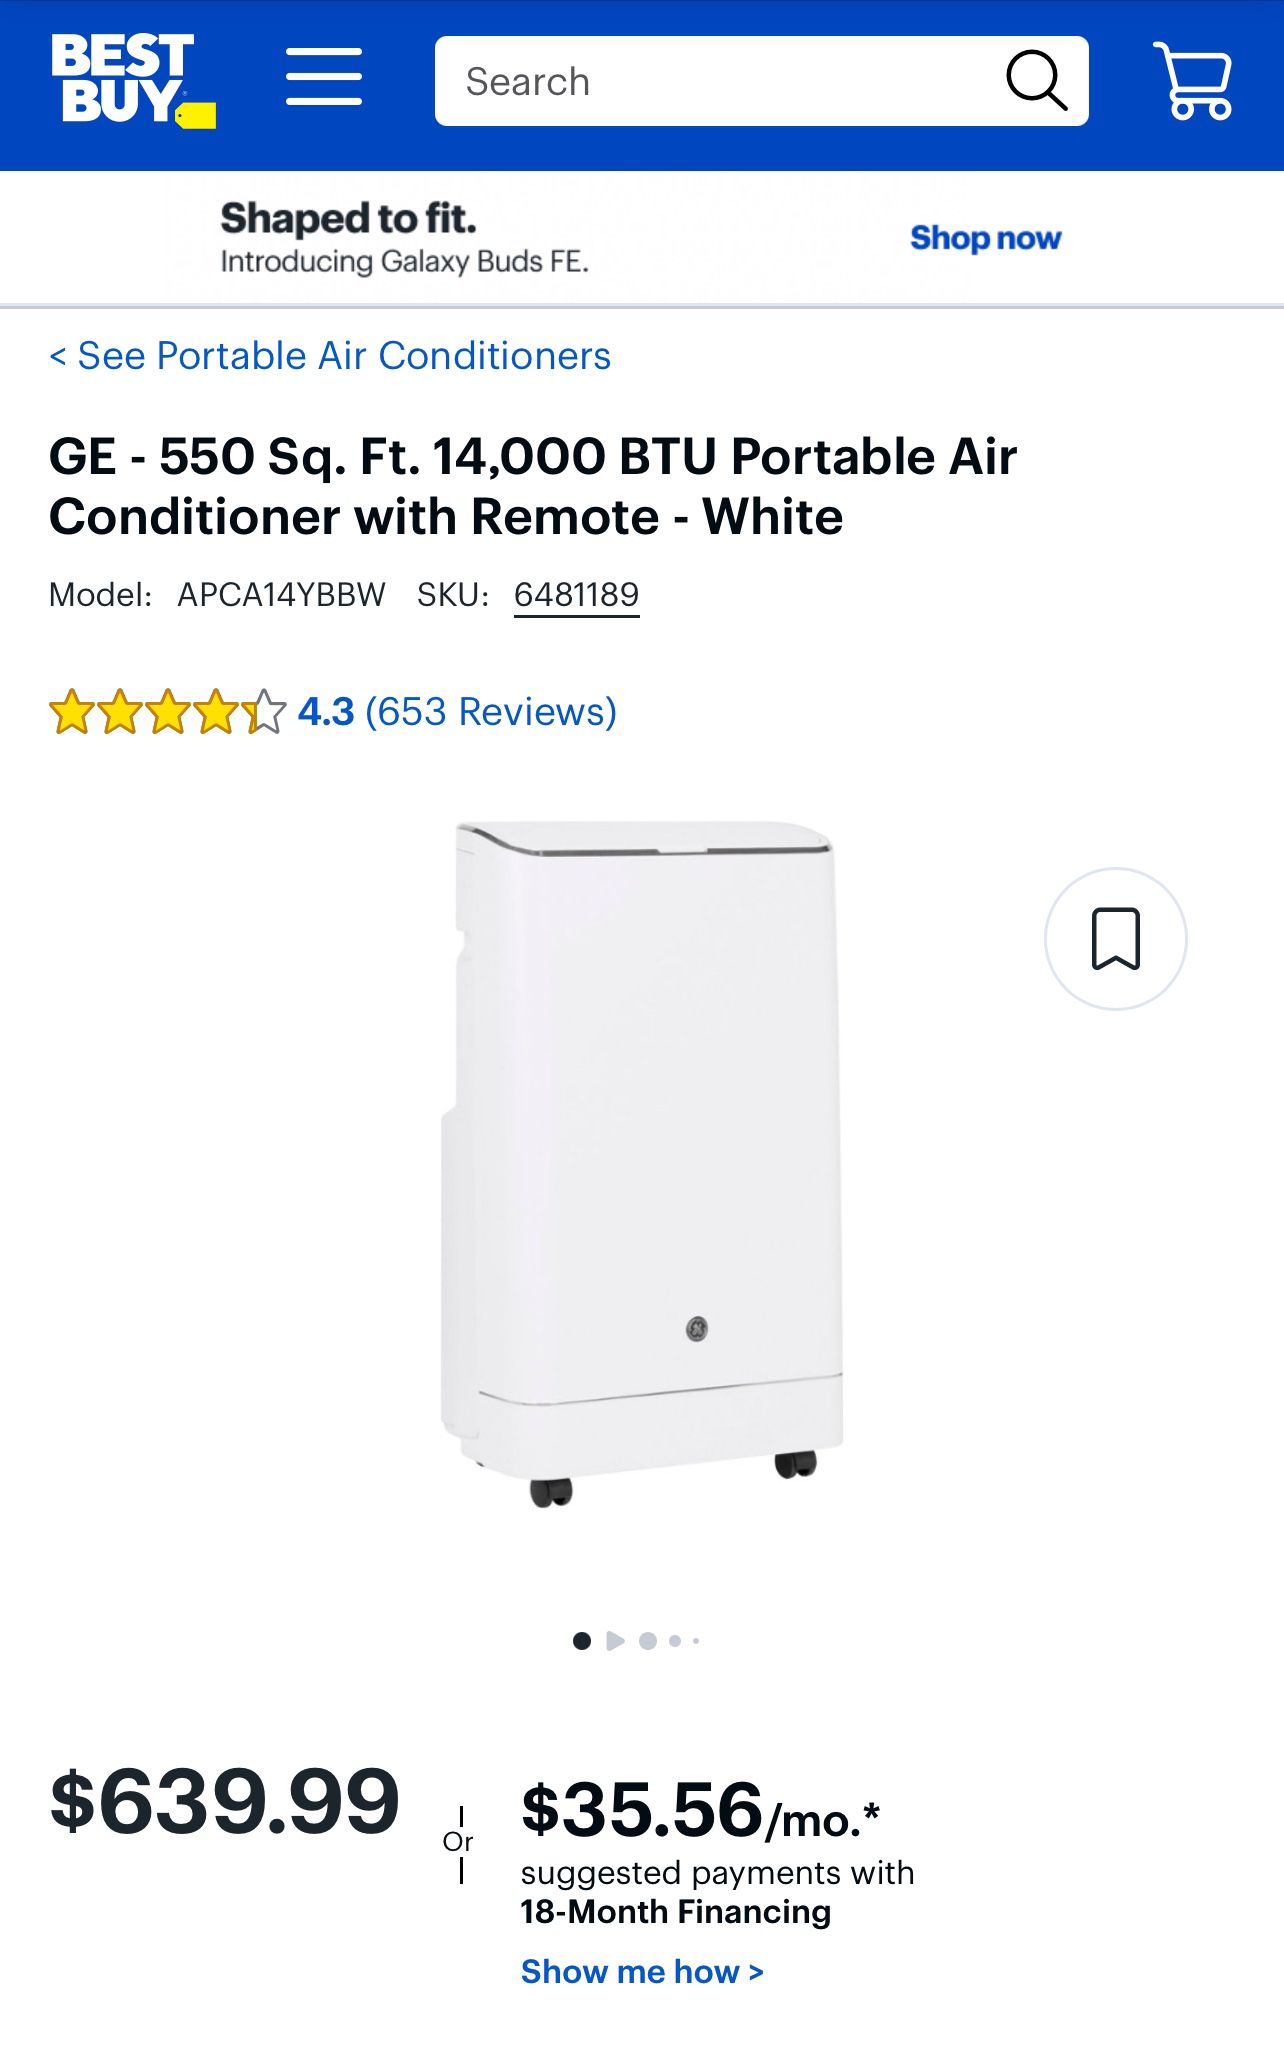 GE 14,000 BTU Portable Air Conditioner 3-in-1 with Dehumidify, Fan, and Auto Evaporation